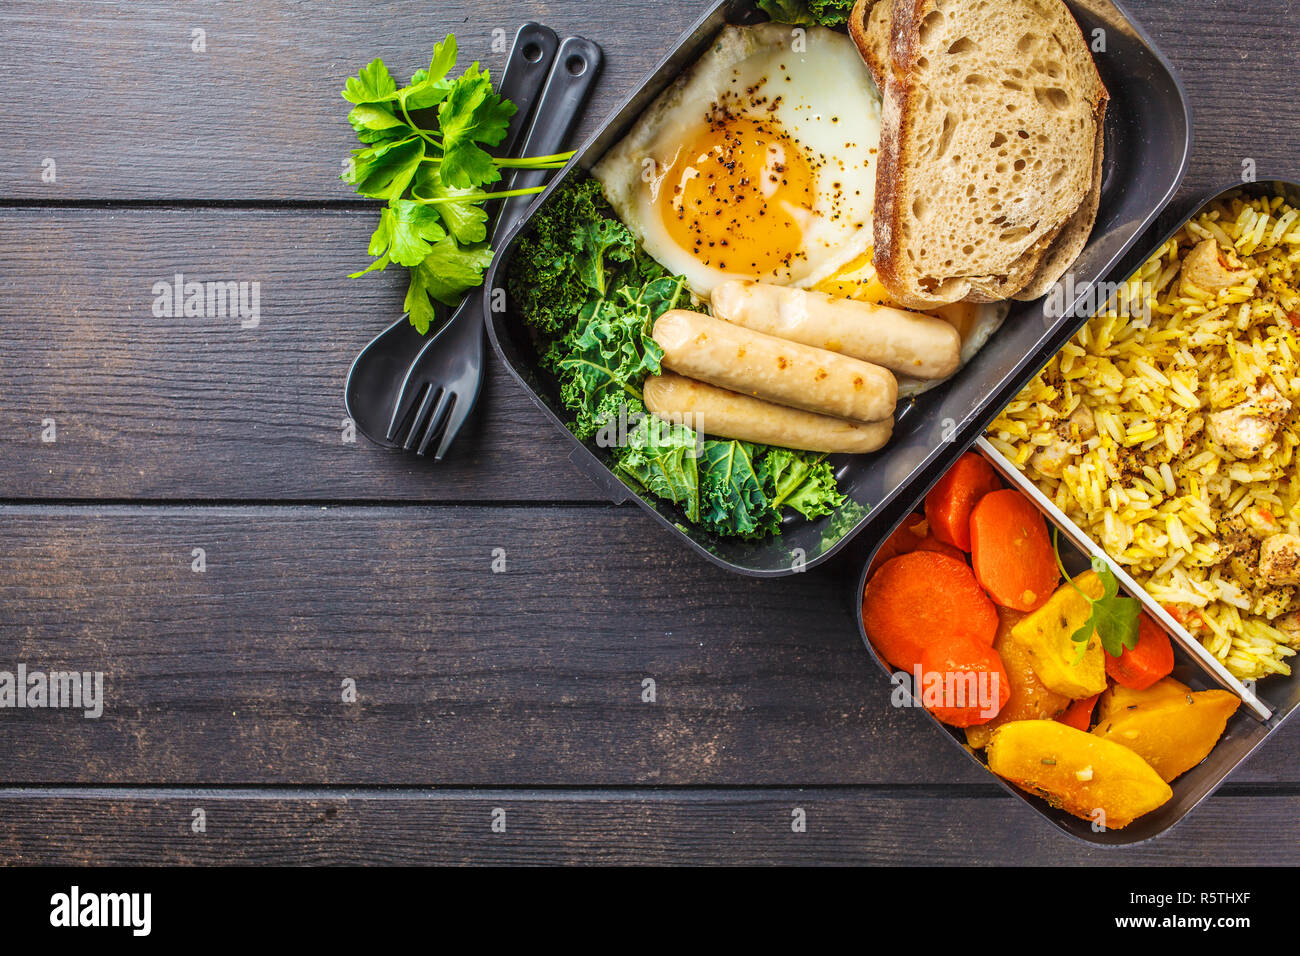 https://c8.alamy.com/comp/R5THXF/meal-prep-containers-with-rice-with-chicken-baked-vegetables-eggs-sausages-and-salad-for-breakfast-and-lunch-overhead-shot-R5THXF.jpg